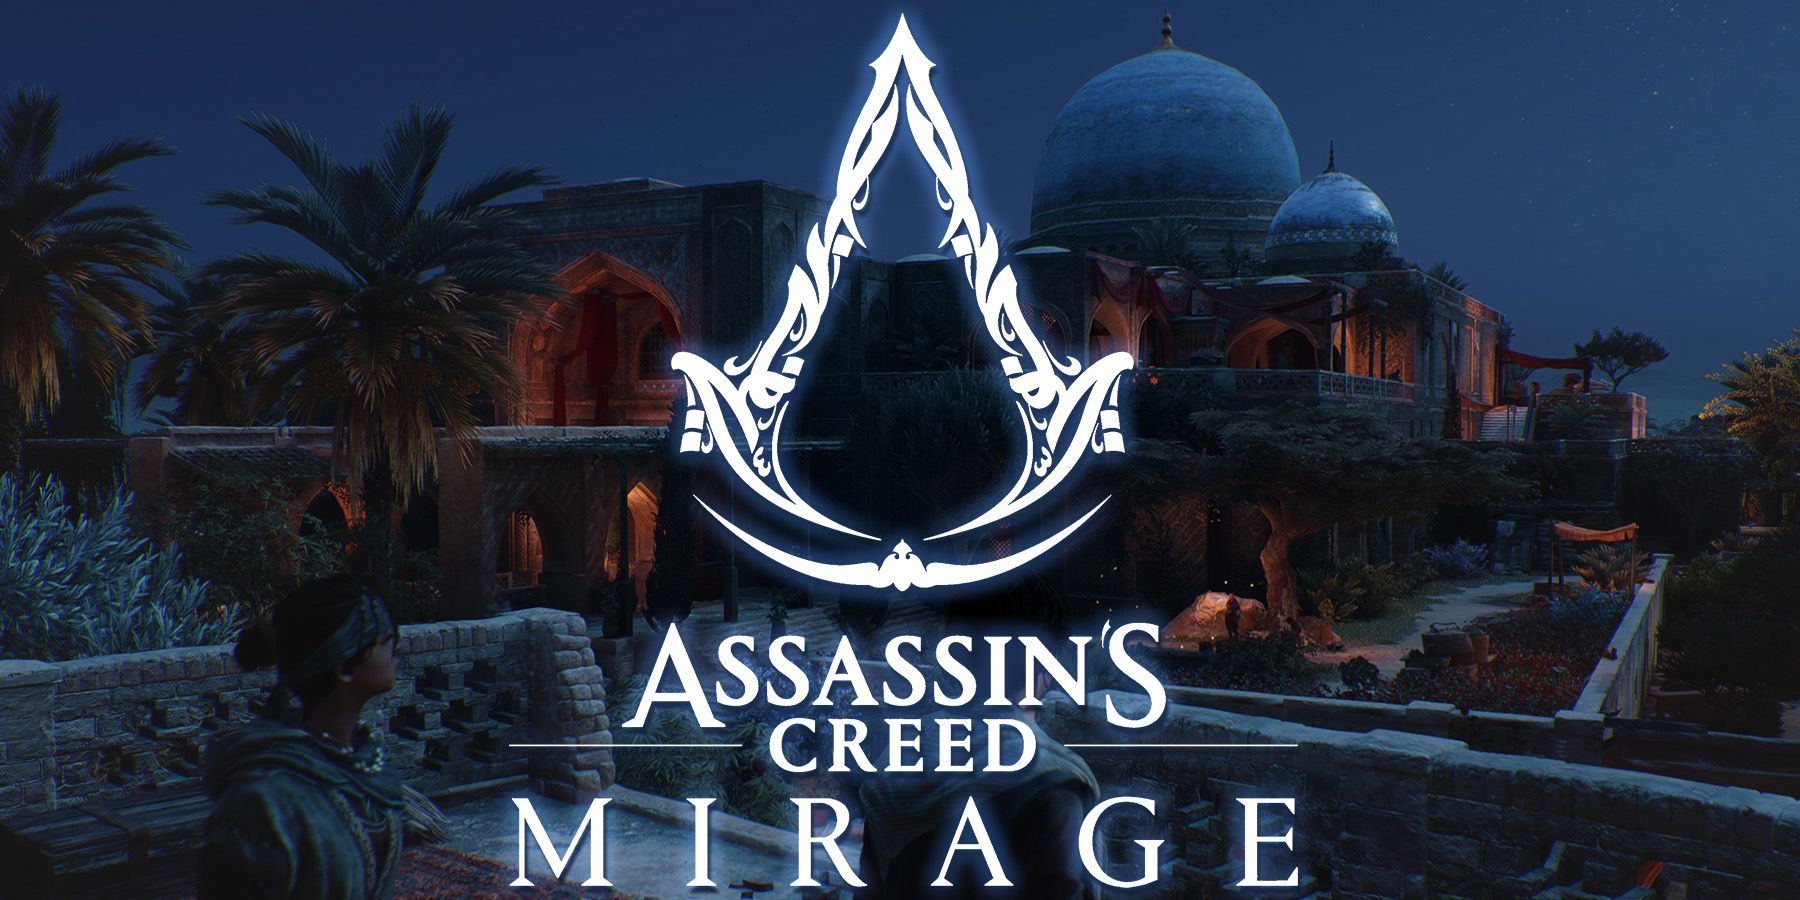 Assassin's Creed Mirage early game nighttime palace with glowing game logo edit